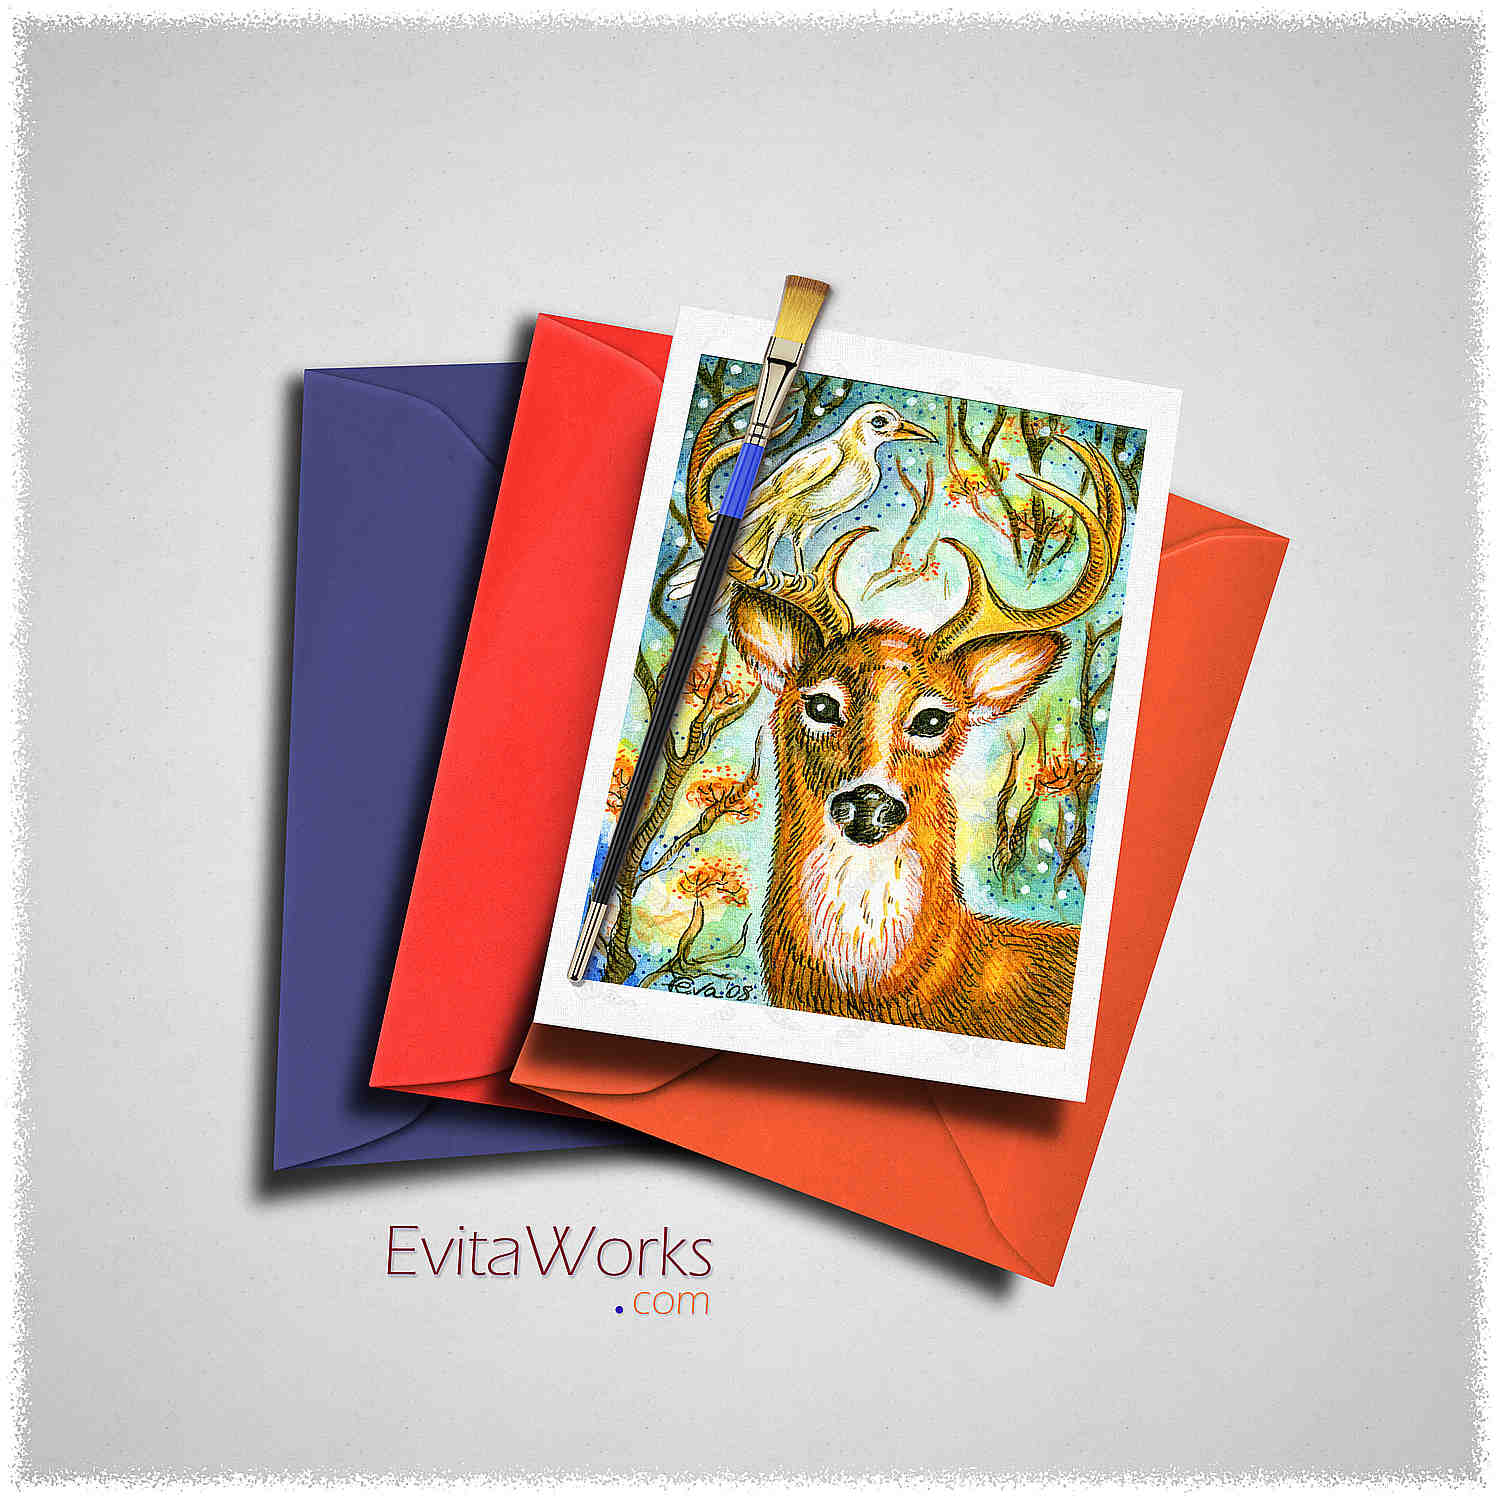 Hit to learn about "Deer 01, cute animalart" on cards